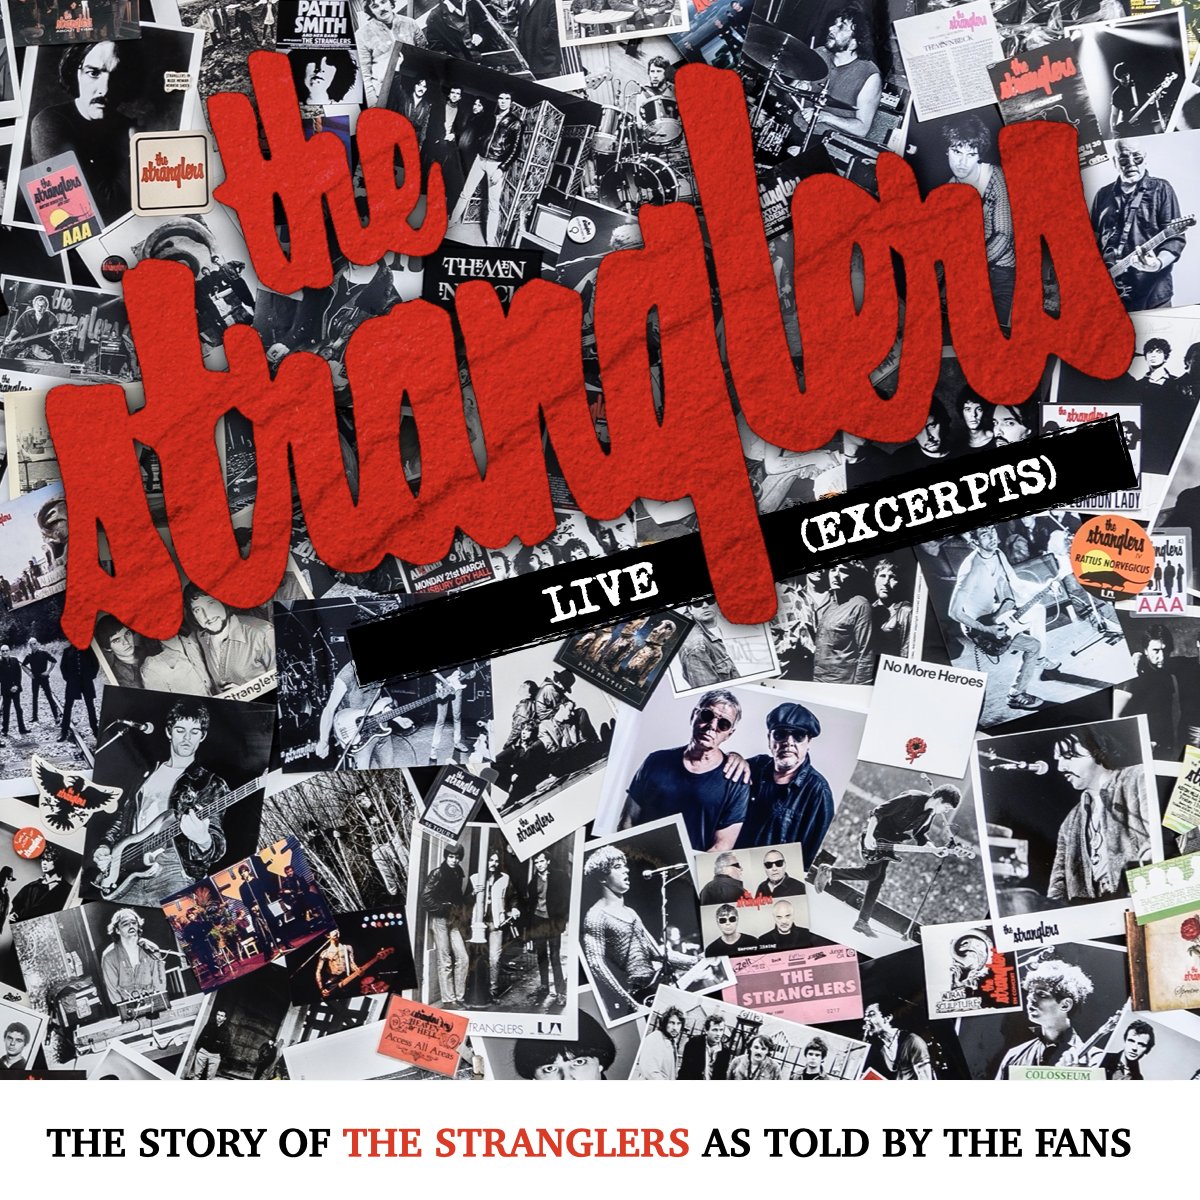 News Littéraires – The Stranglers – Live (Excerpts) – The Story of The Stranglers as told by the fans